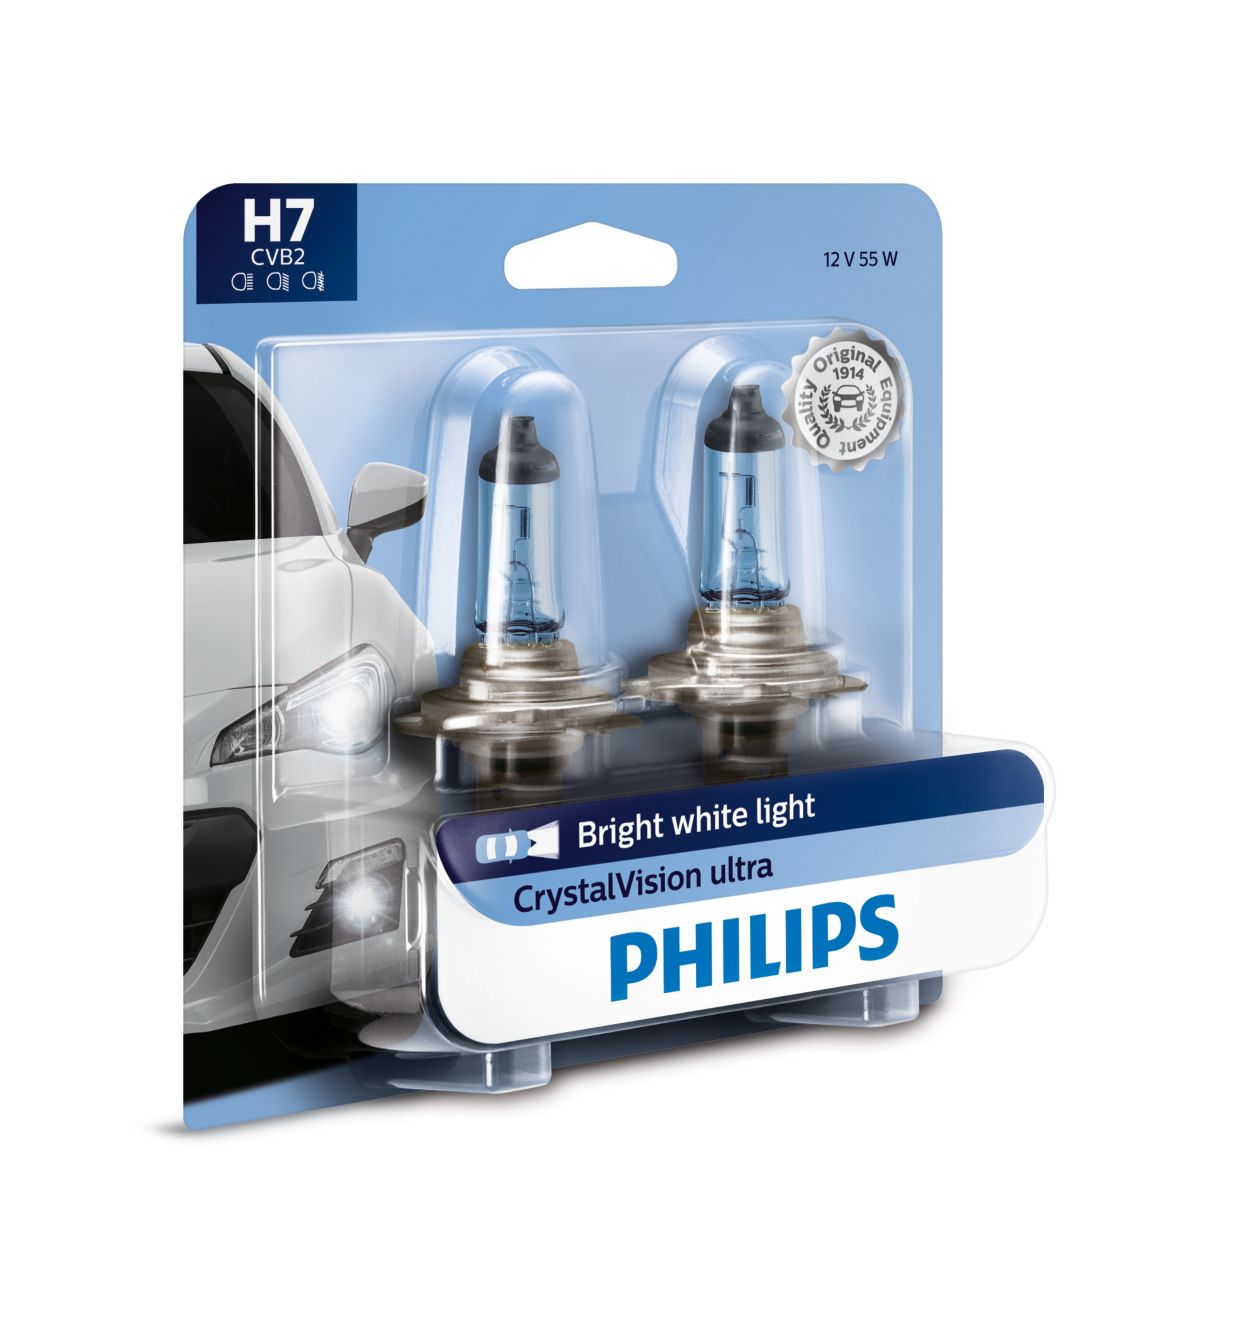 Philips 12972WVUB1 WhiteVision Ultra Xenon Lampe de phare H7 4 200 K Blanc  froid